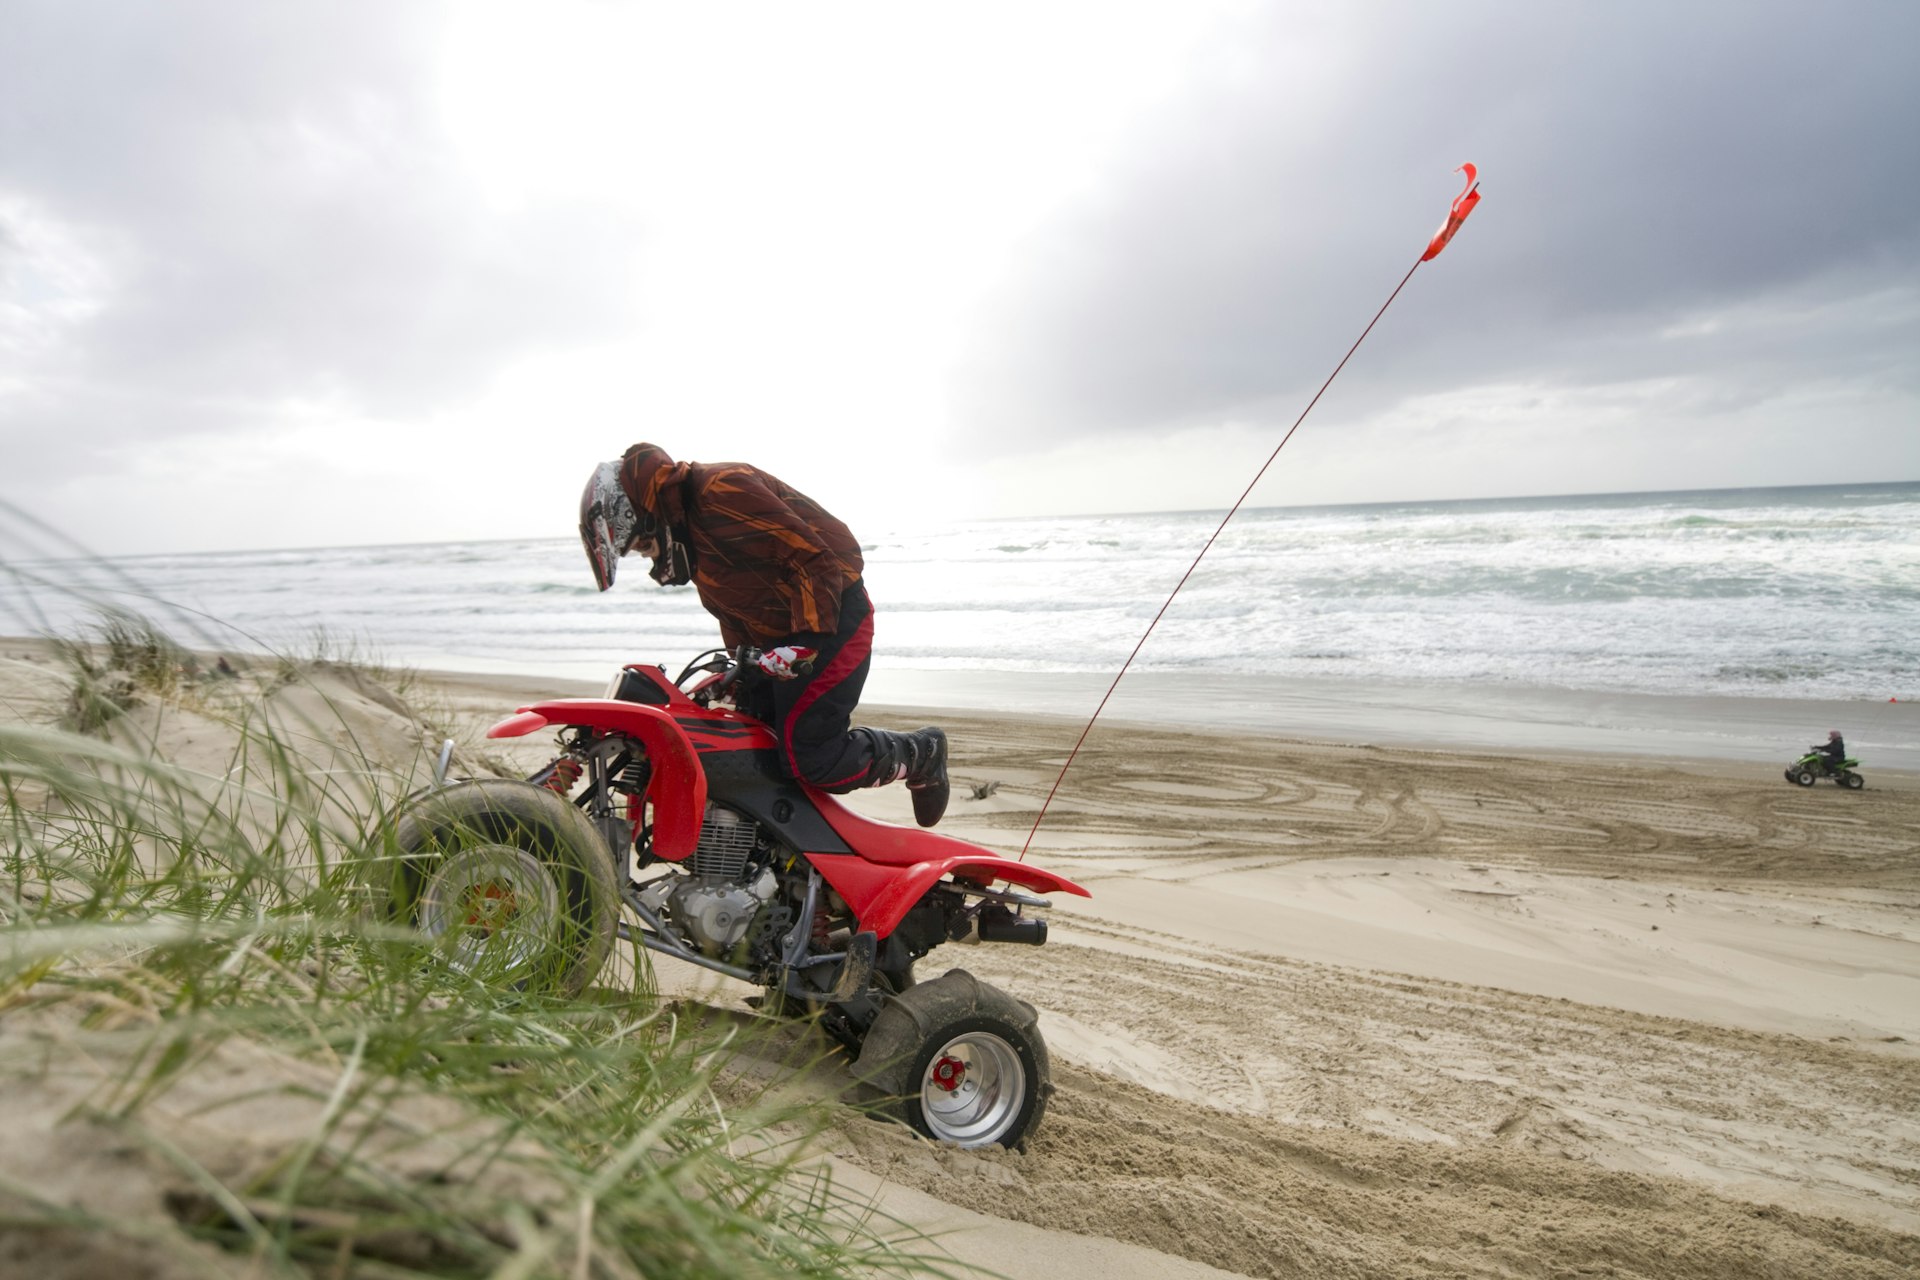 Quad rider driving an ATV up a grassy hill on the Oregon coast beach. Second quad rider off in the distance closer to the ocean waves. 